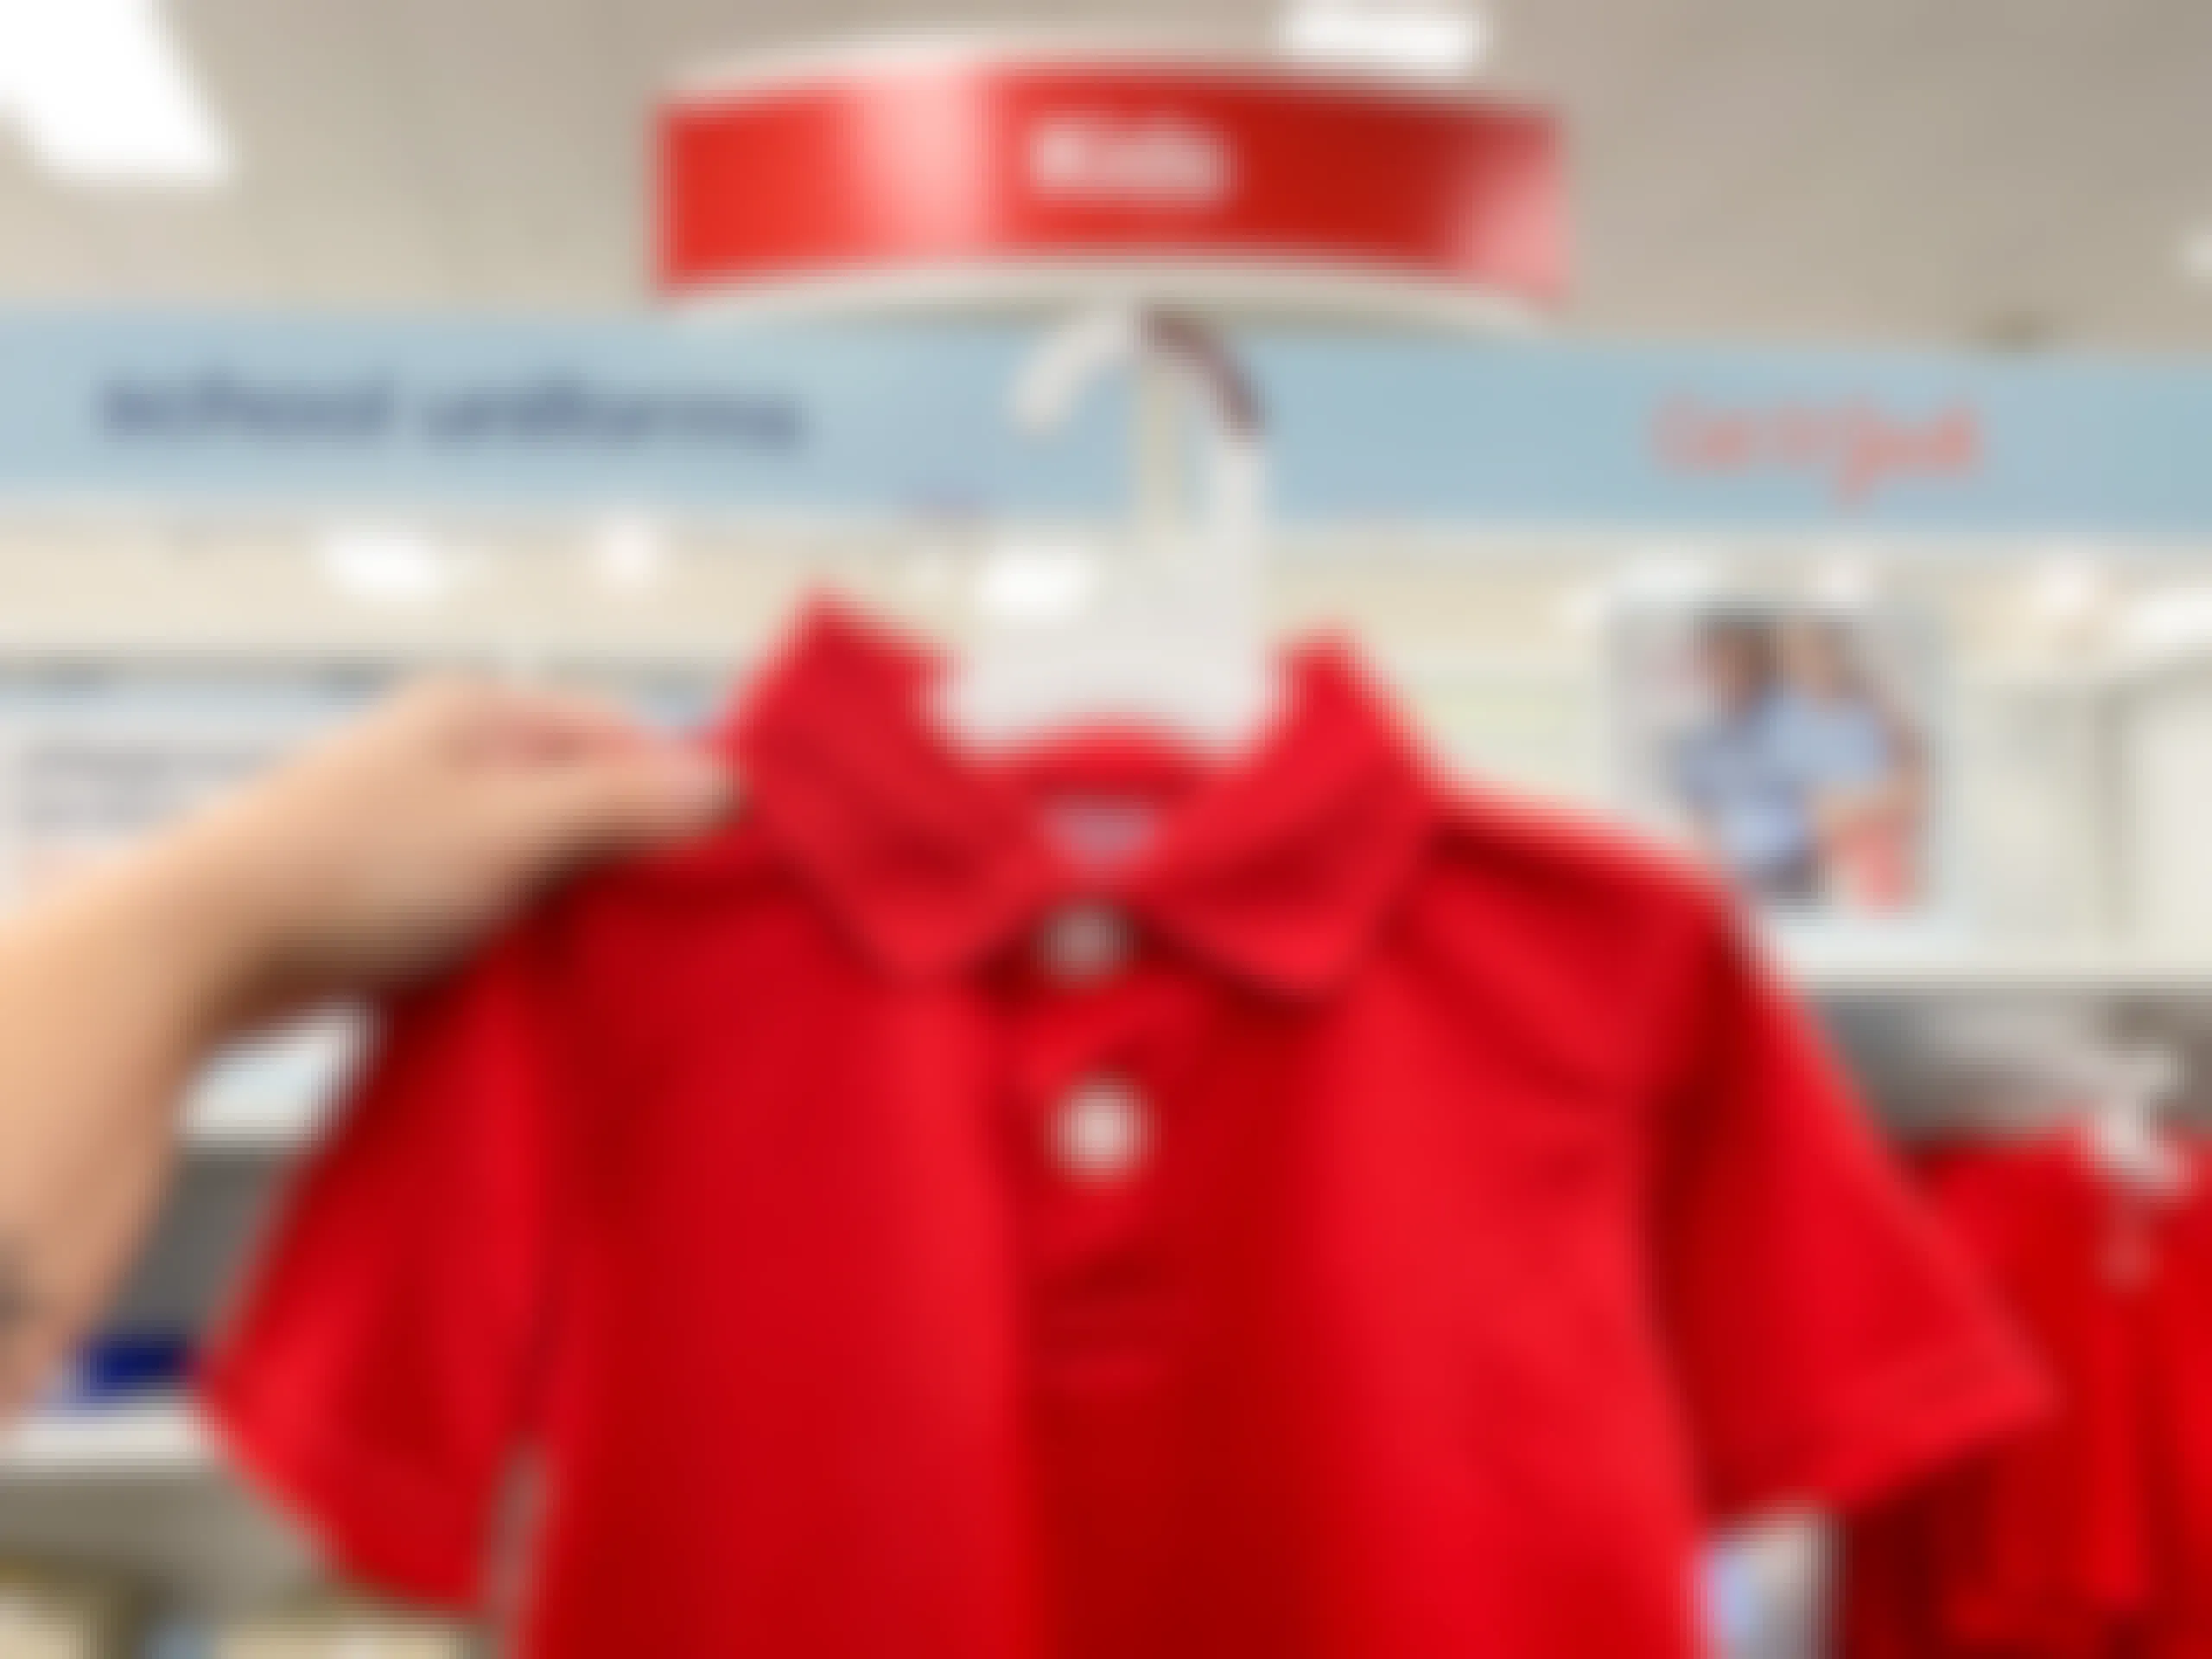 A person's hand holding up a Cat & Jack kids school uniform polo in front of the school uniform section signage at Target.